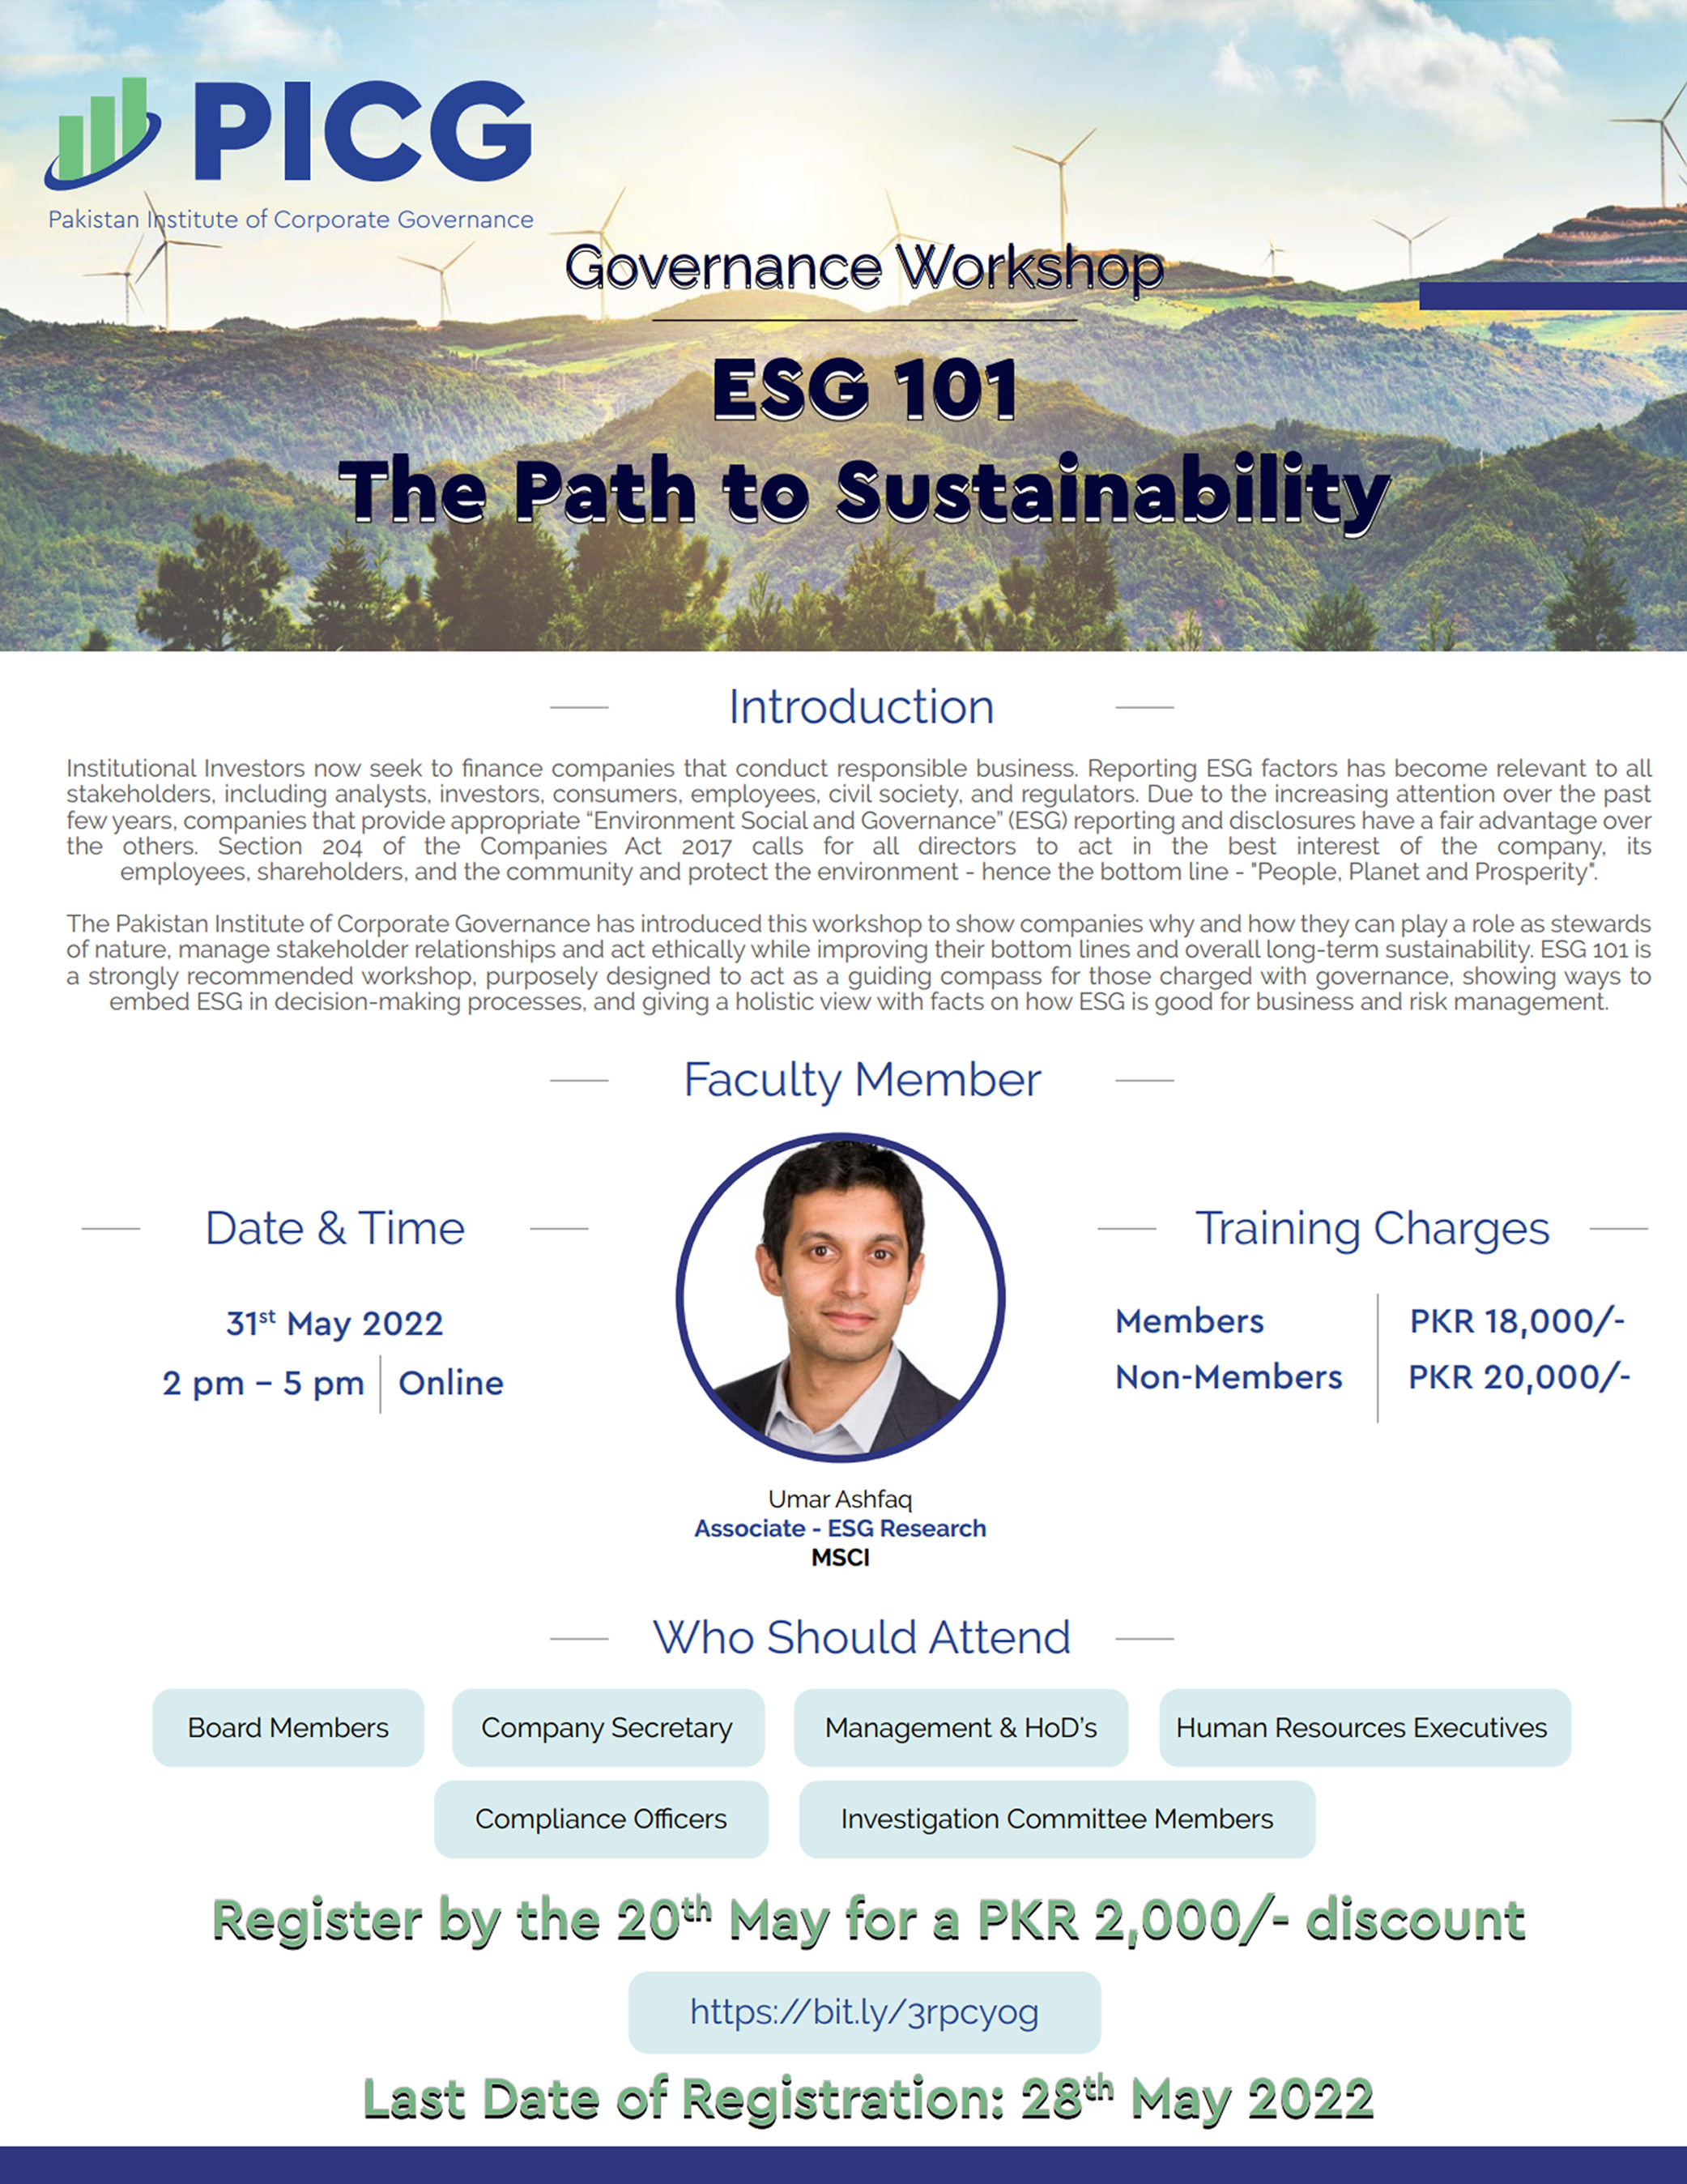 ESG 101 - The Path to Sustainability Workshop